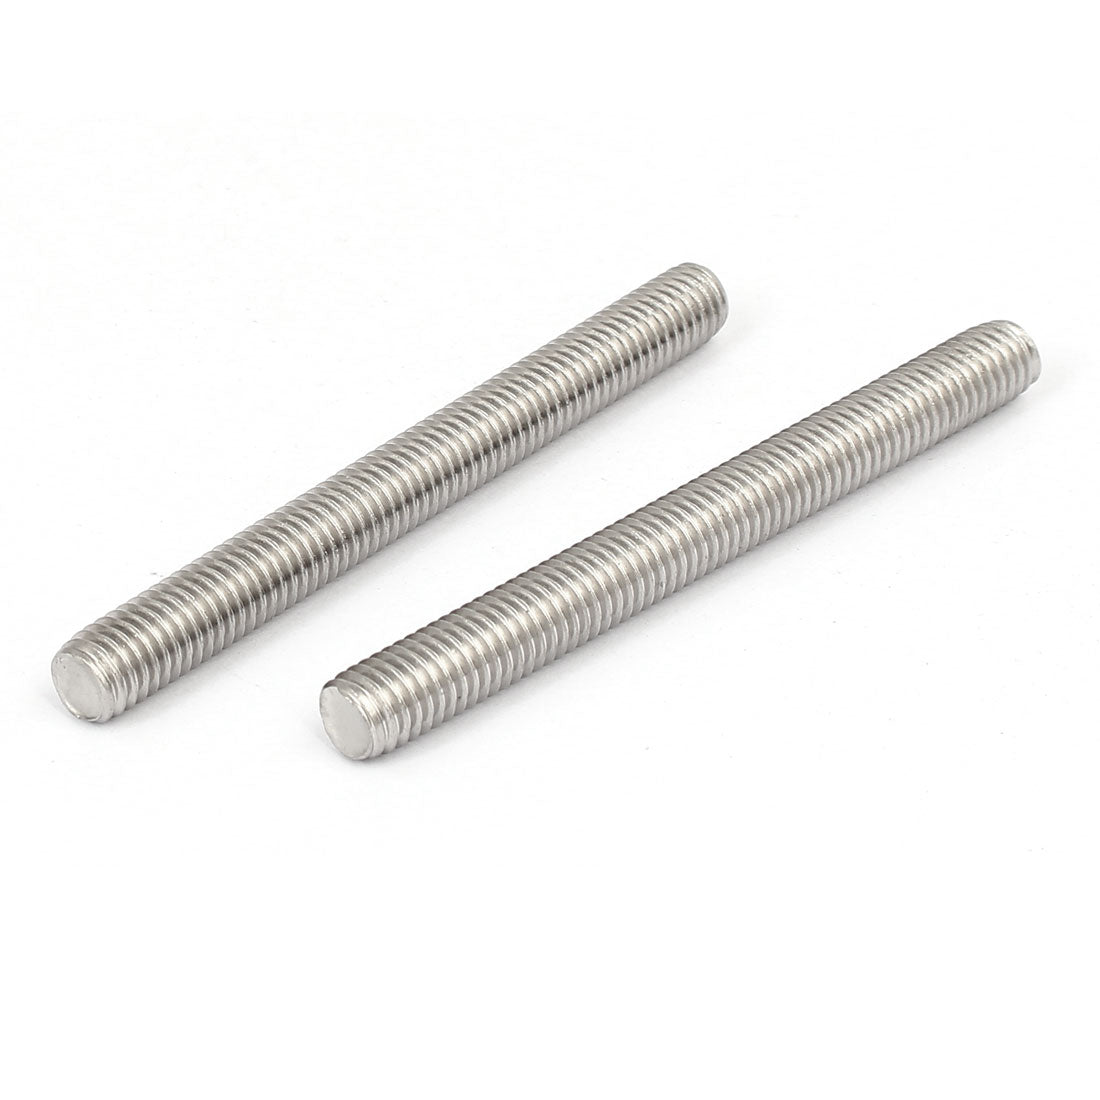 uxcell Uxcell M8 x 80mm 1.25mm Pitch 304 Stainless Steel Fully Threaded Rods Hardware 20 Pcs